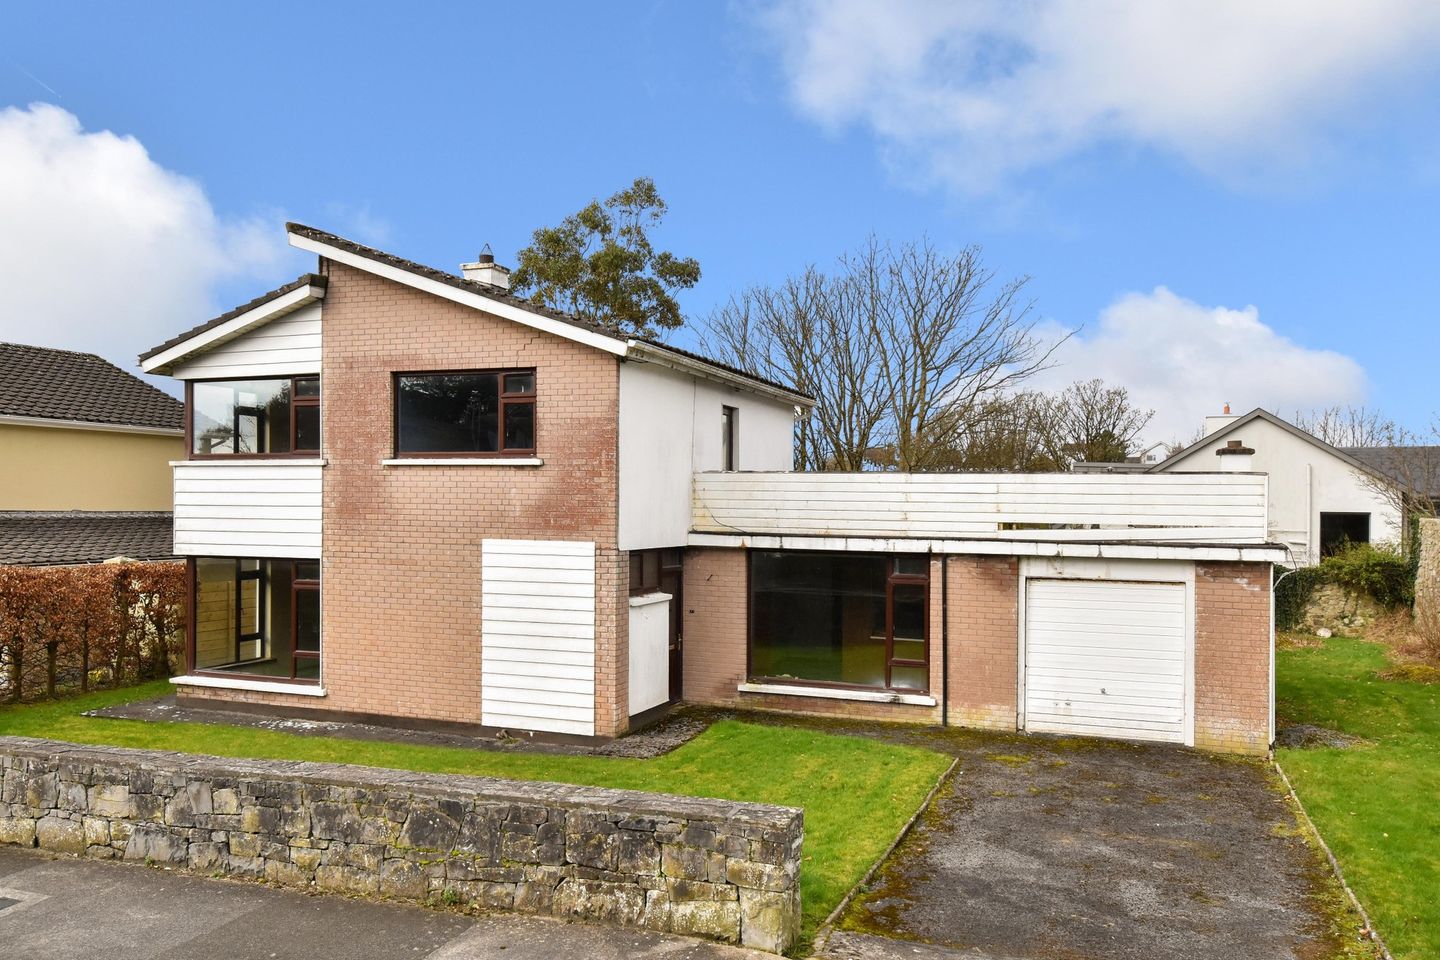 13 Pollnarooma West, Salthill, Co. Galway